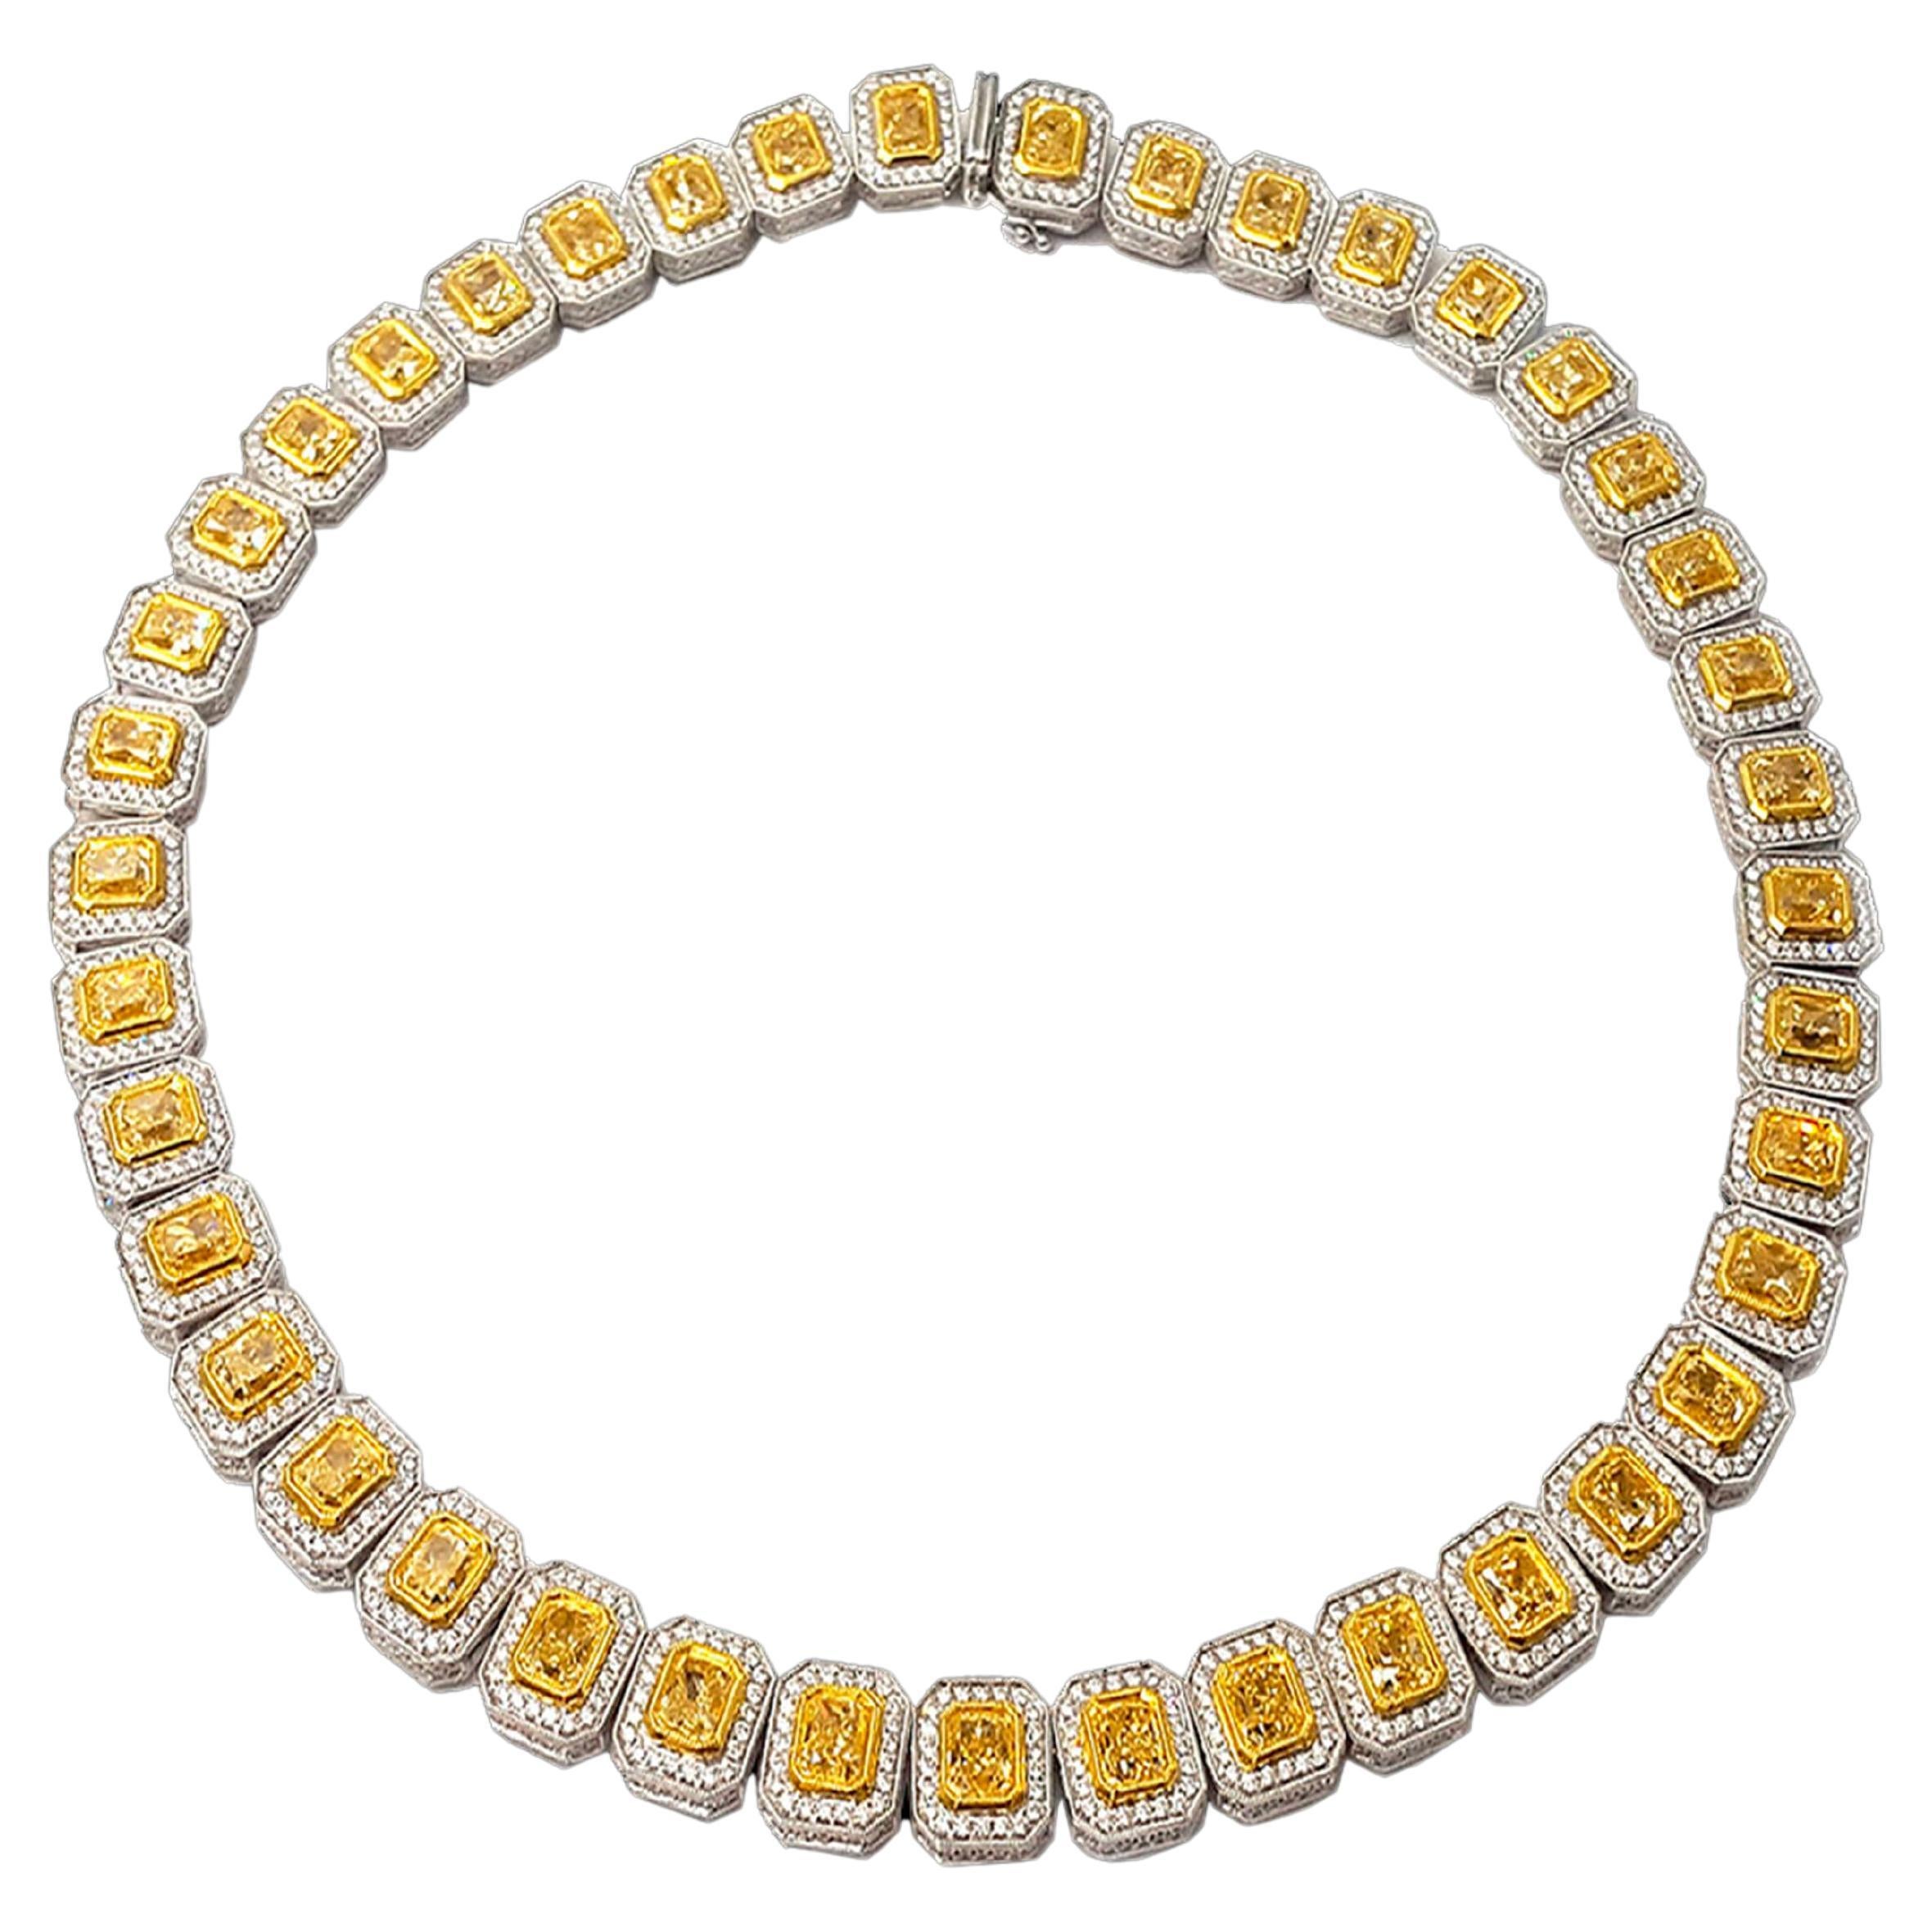 37 Carat Yellow and White Diamond Halo Eternity Necklace, Set in 18k Gold